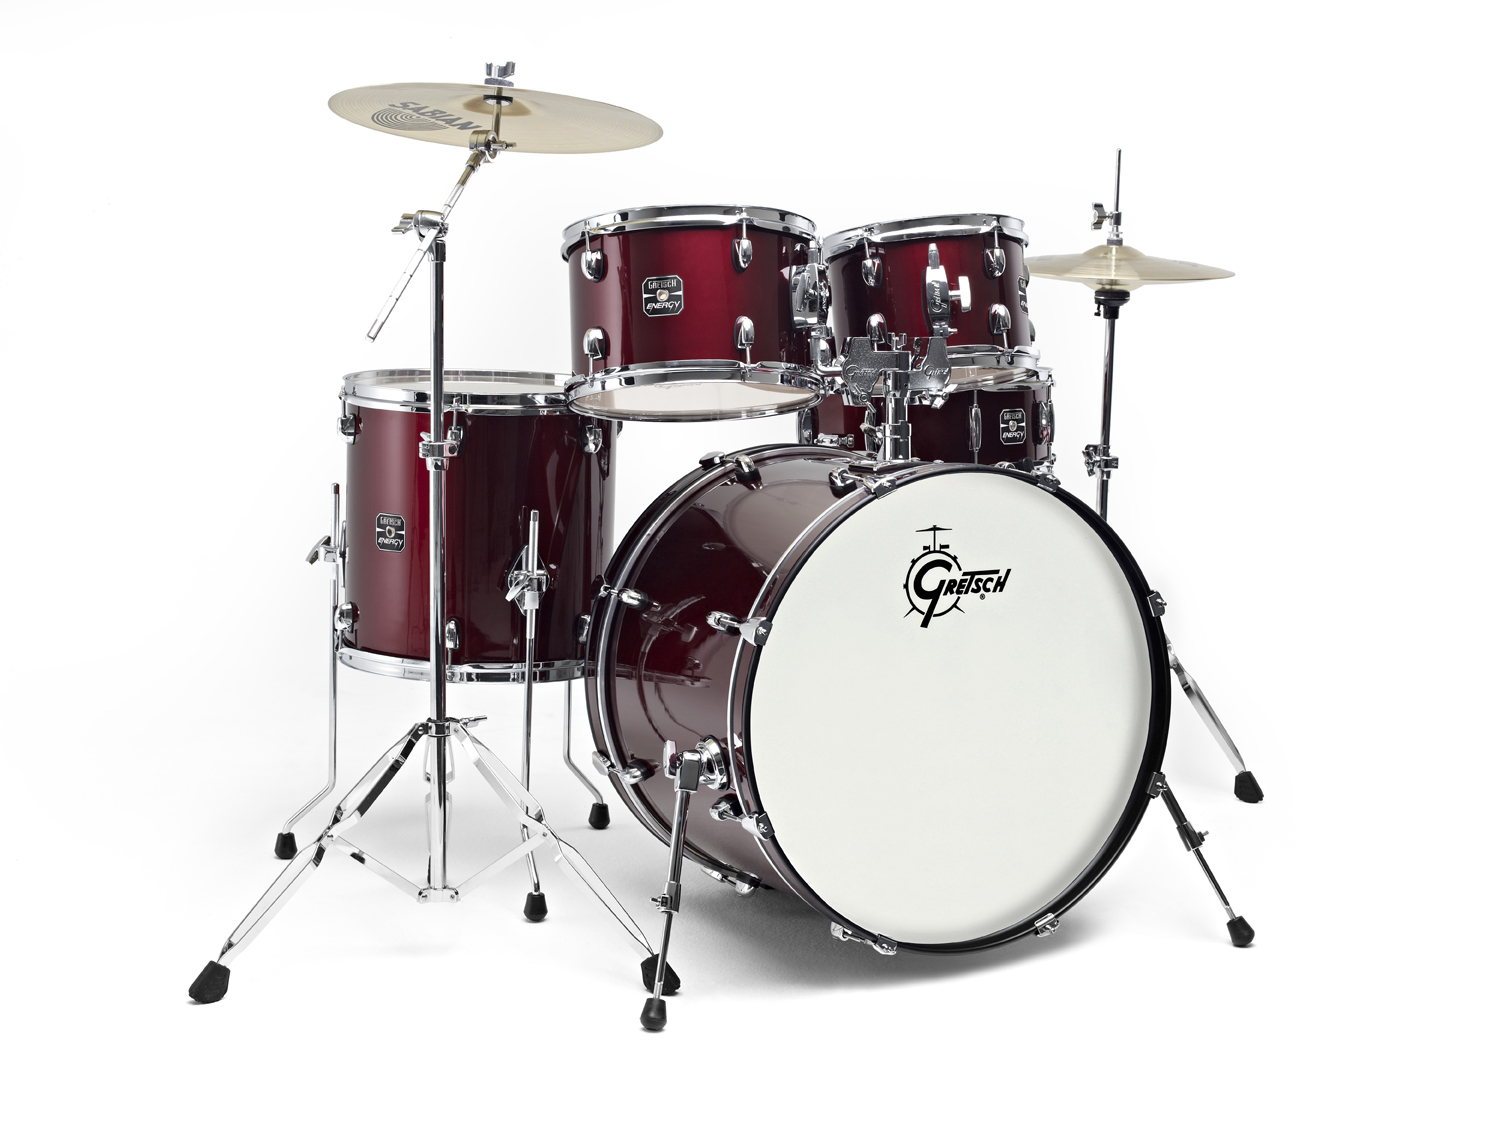 GRETSCH DRUMS GE1-E605TK-WR- NEW ENERGY FUSION 20